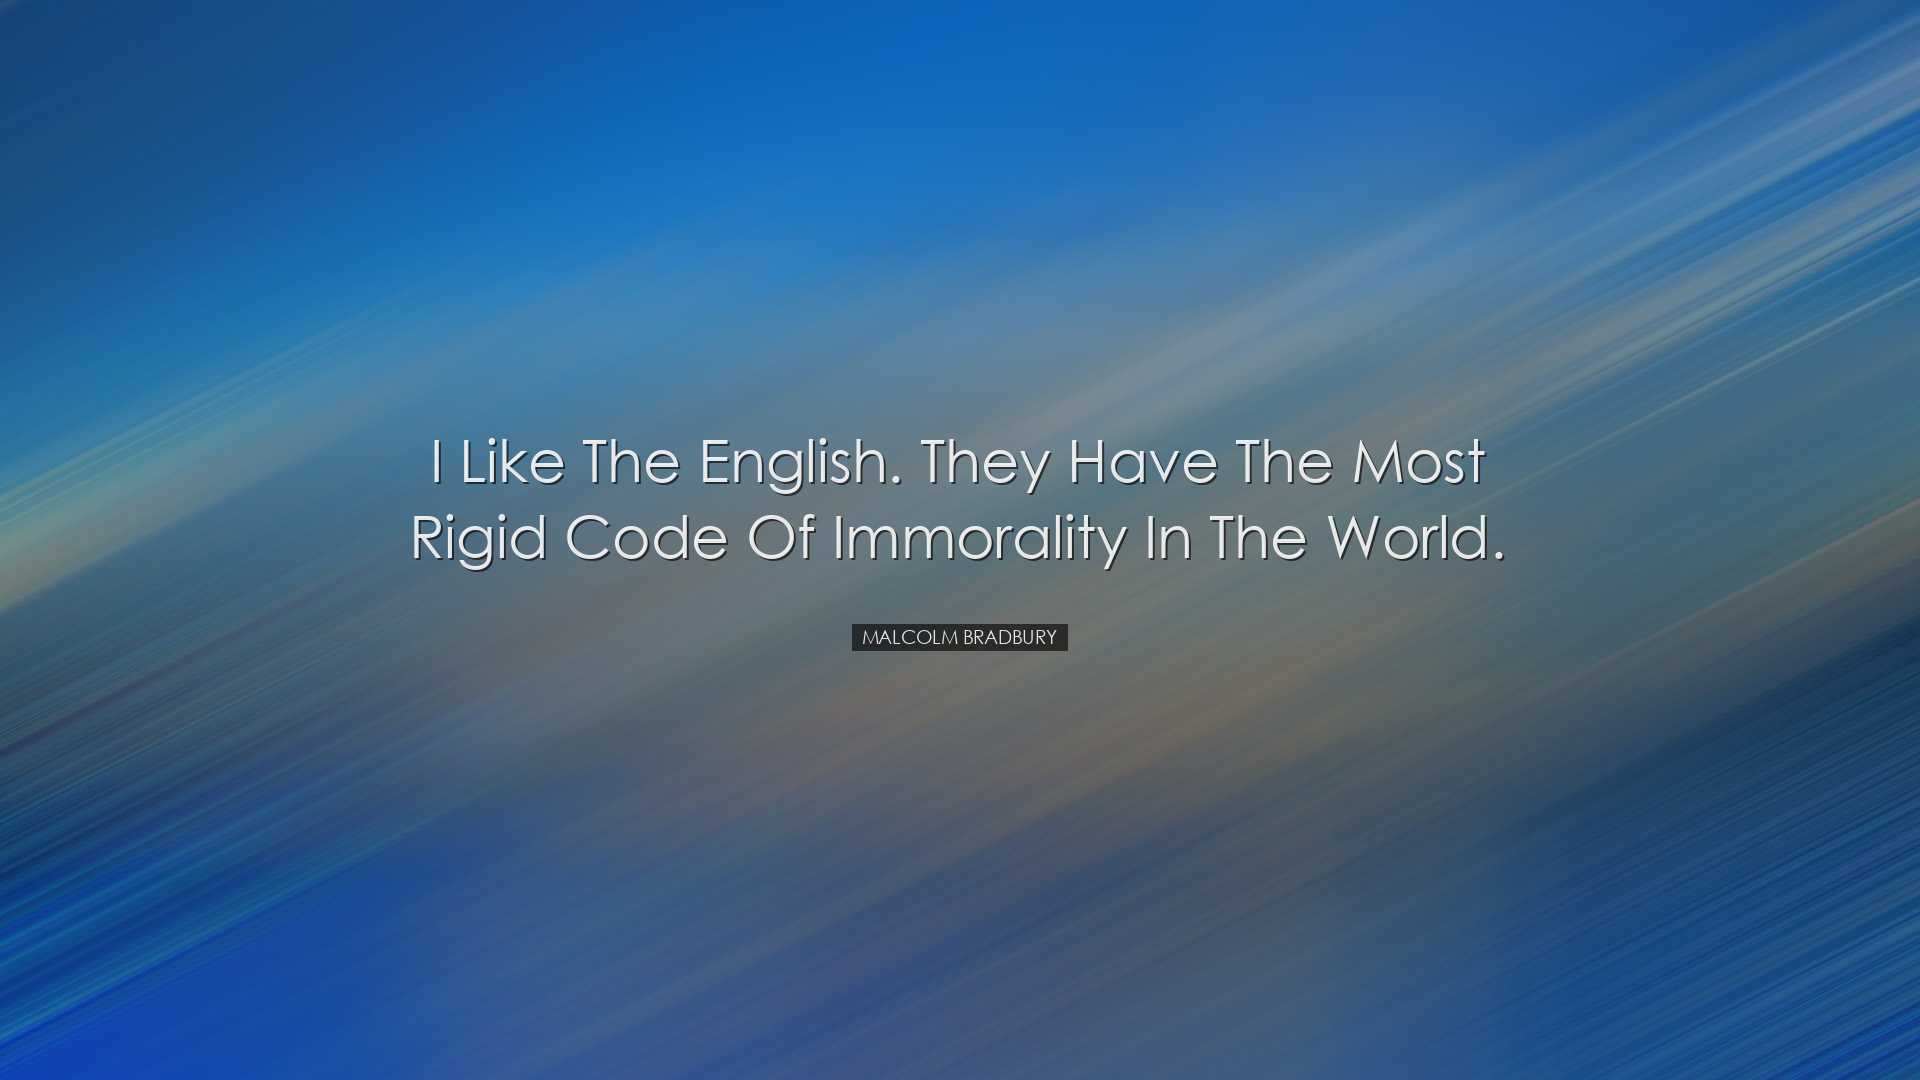 I like the English. They have the most rigid code of immorality in